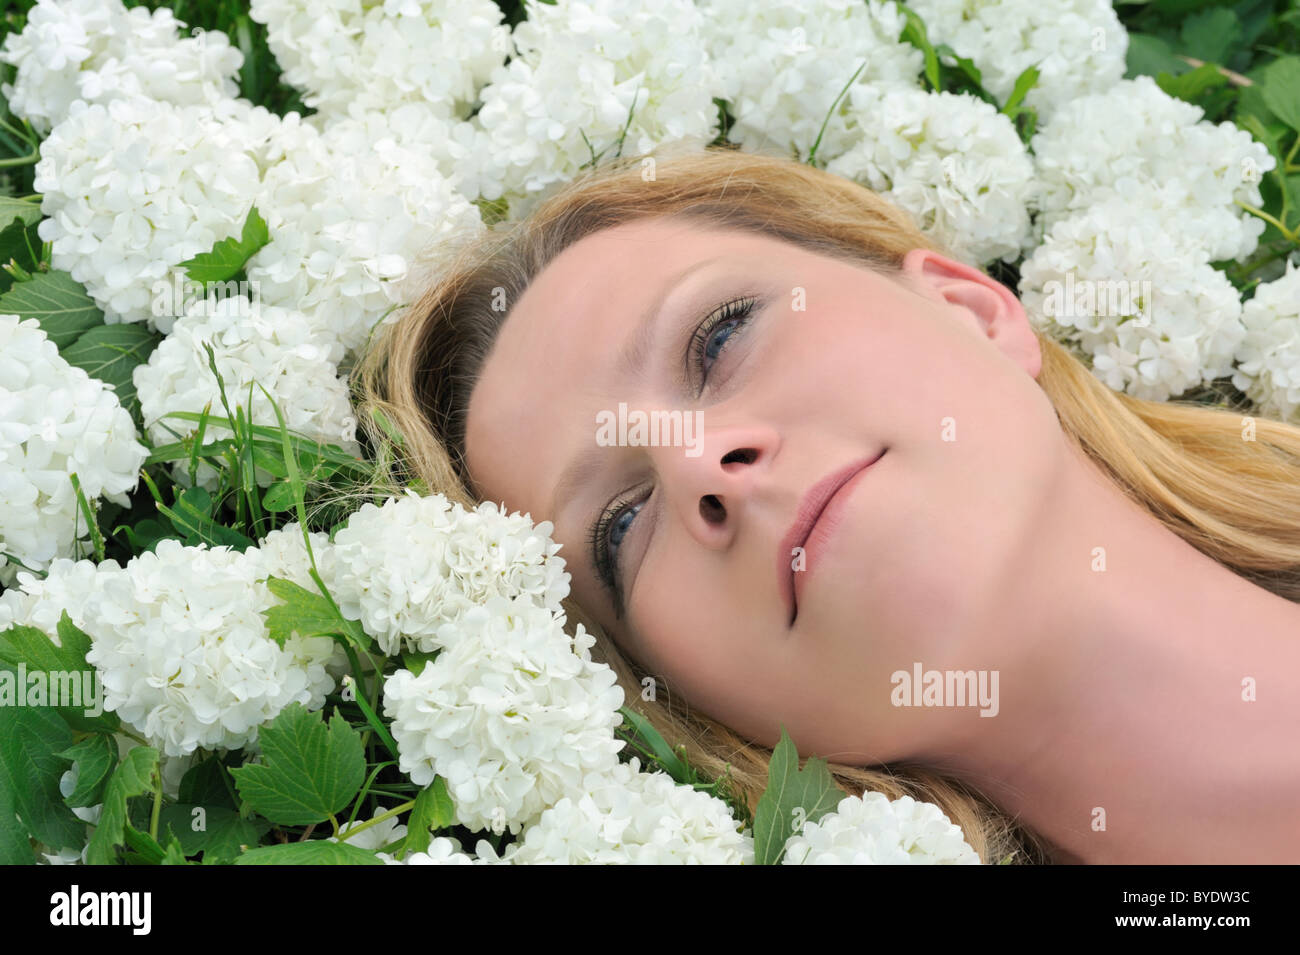 Young woman laying in flowers - snowballs Stock Photo